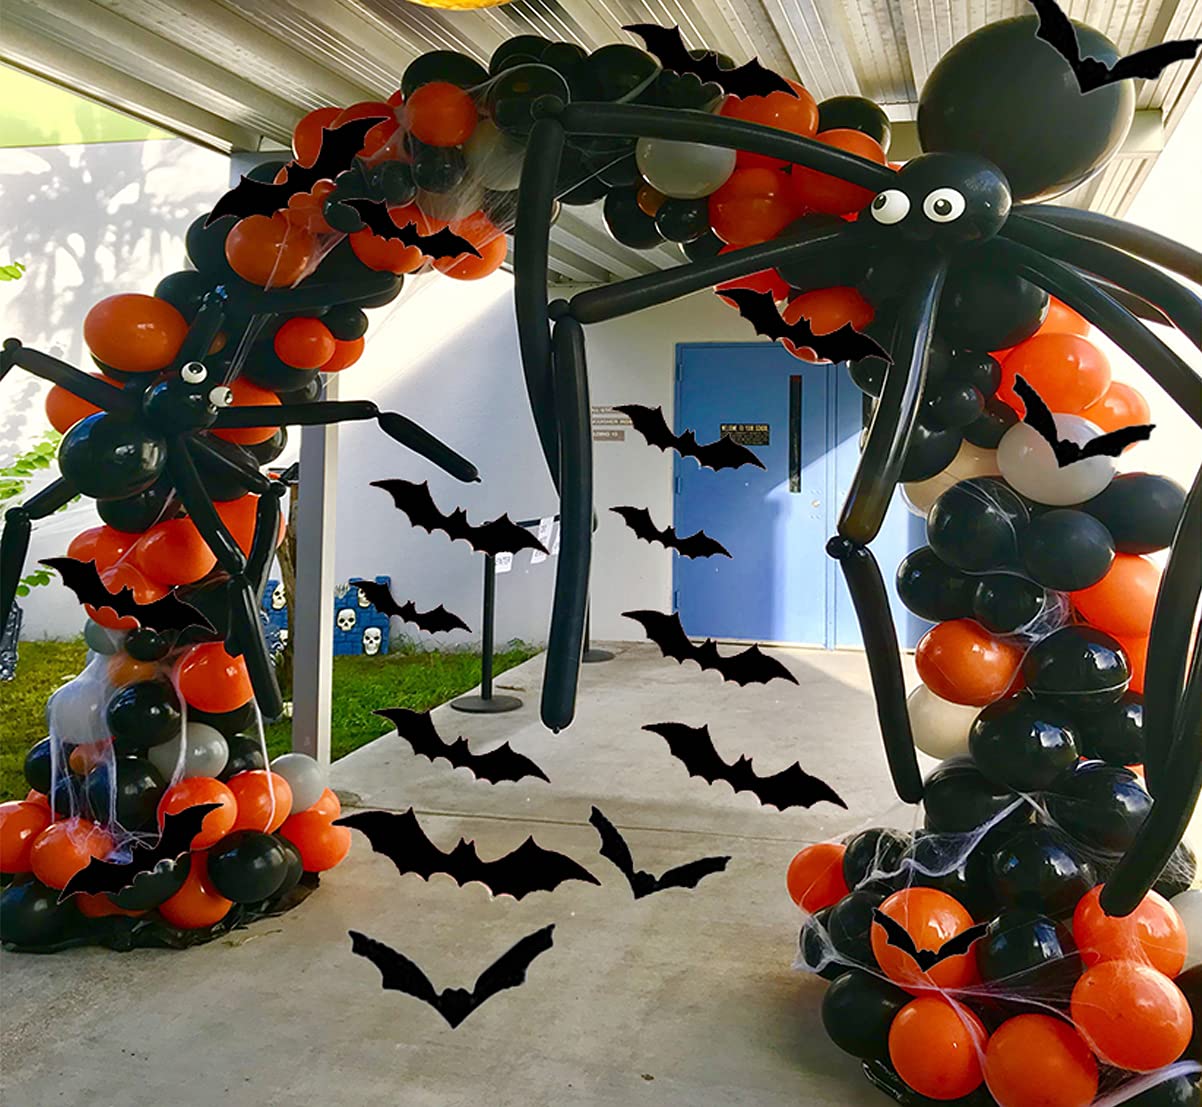 A spooky Halloween balloon arch with bats and spiders